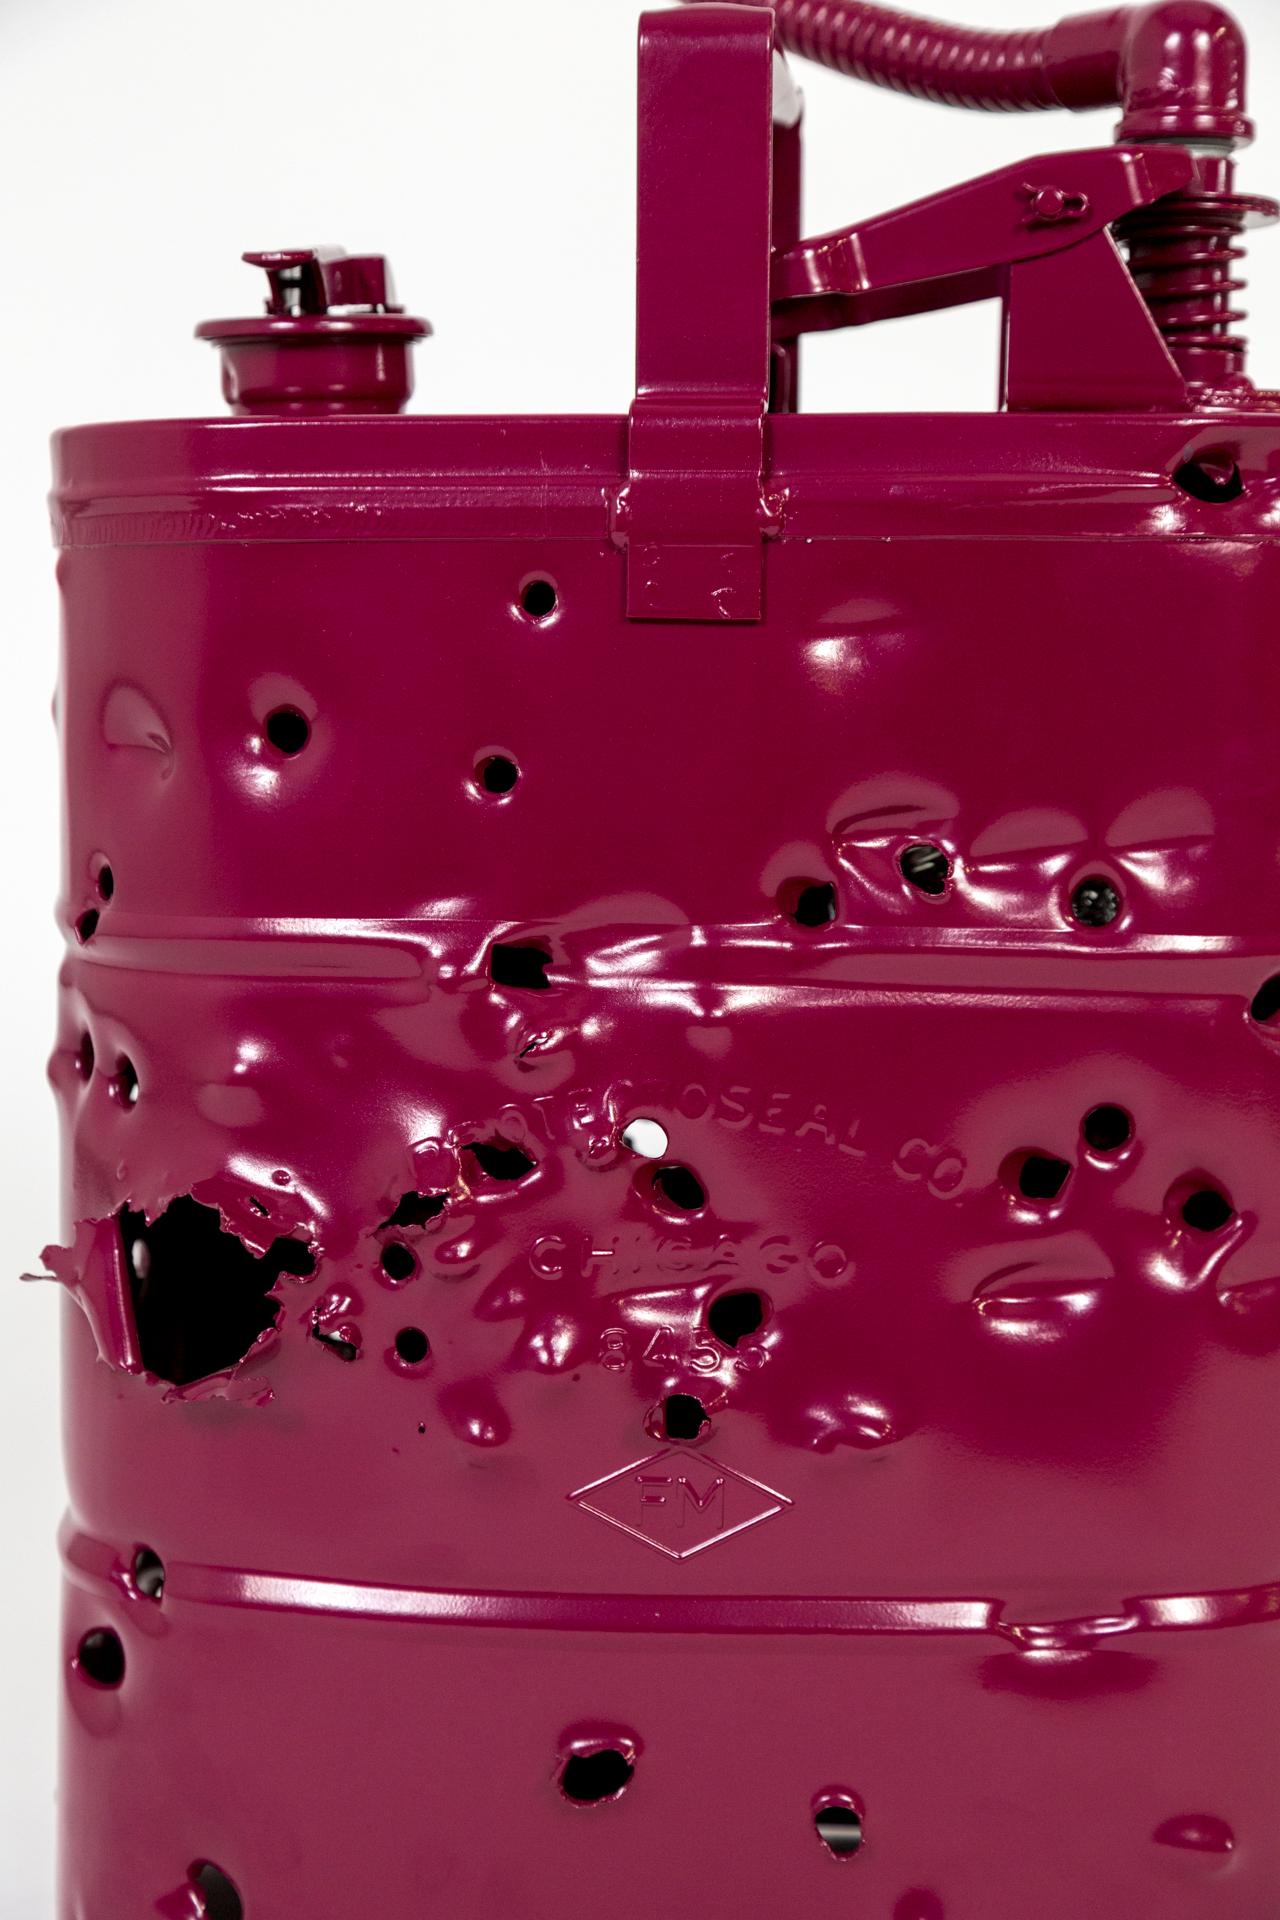 This antique metal gas can was shot with bullets, powder coated and wired as a lamp to become a bold work of art made Charles Linder. He has been making artwork out of bullet-riddled objects for over 30 years. The light coming through the holes has